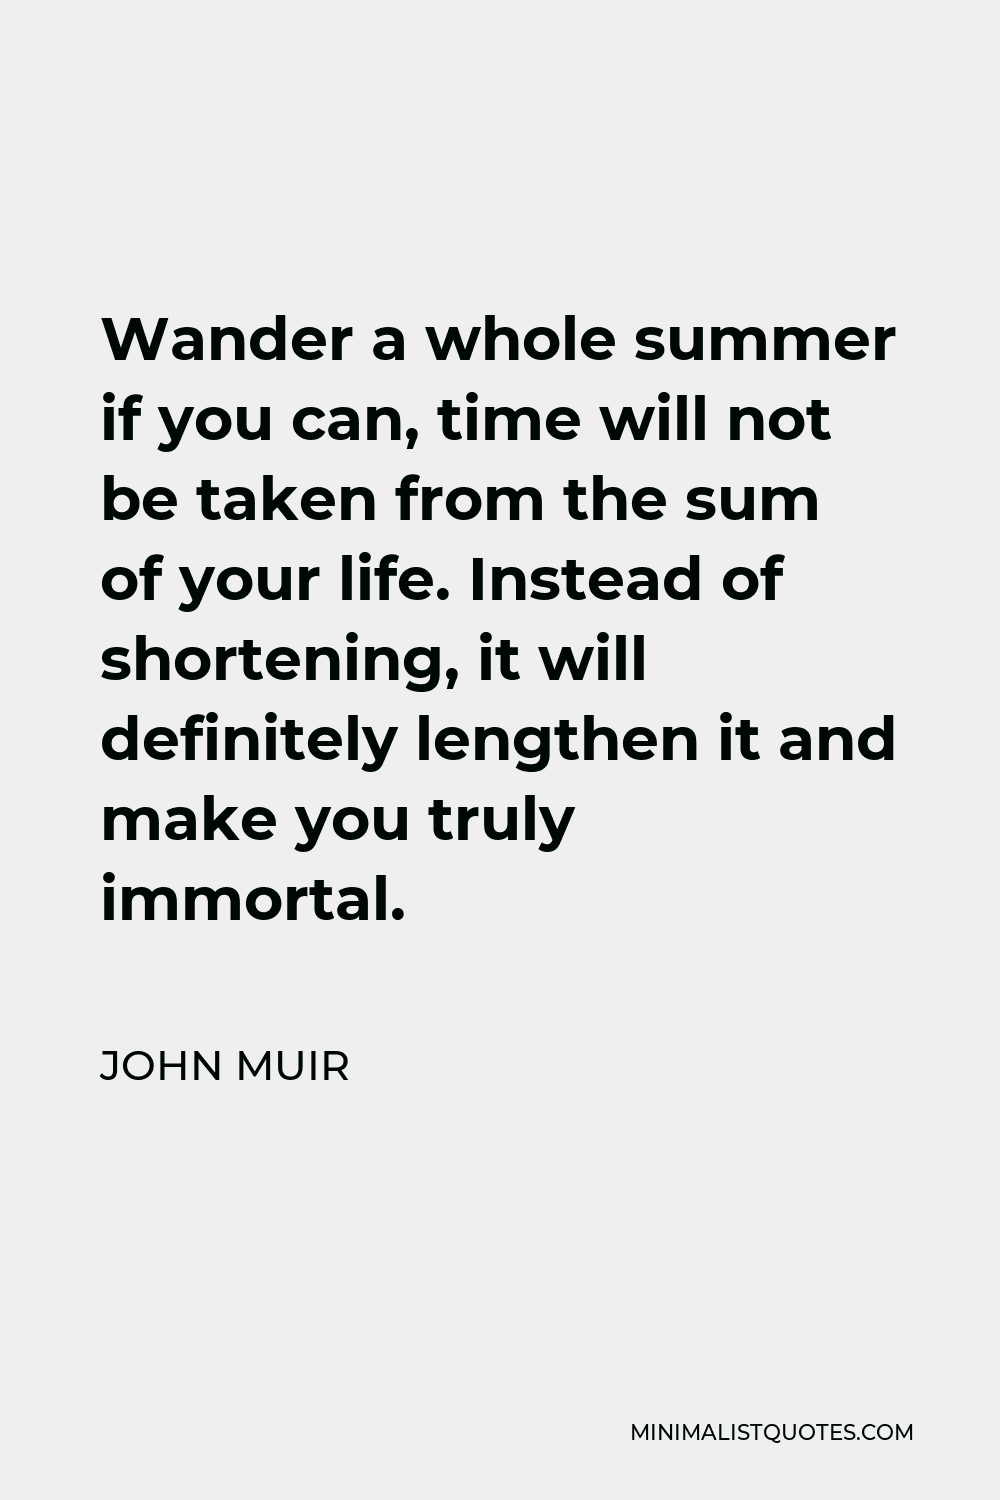 John Muir Quote - Wander a whole summer if you can, time will not be taken from the sum of your life. Instead of shortening, it will definitely lengthen it and make you truly immortal.